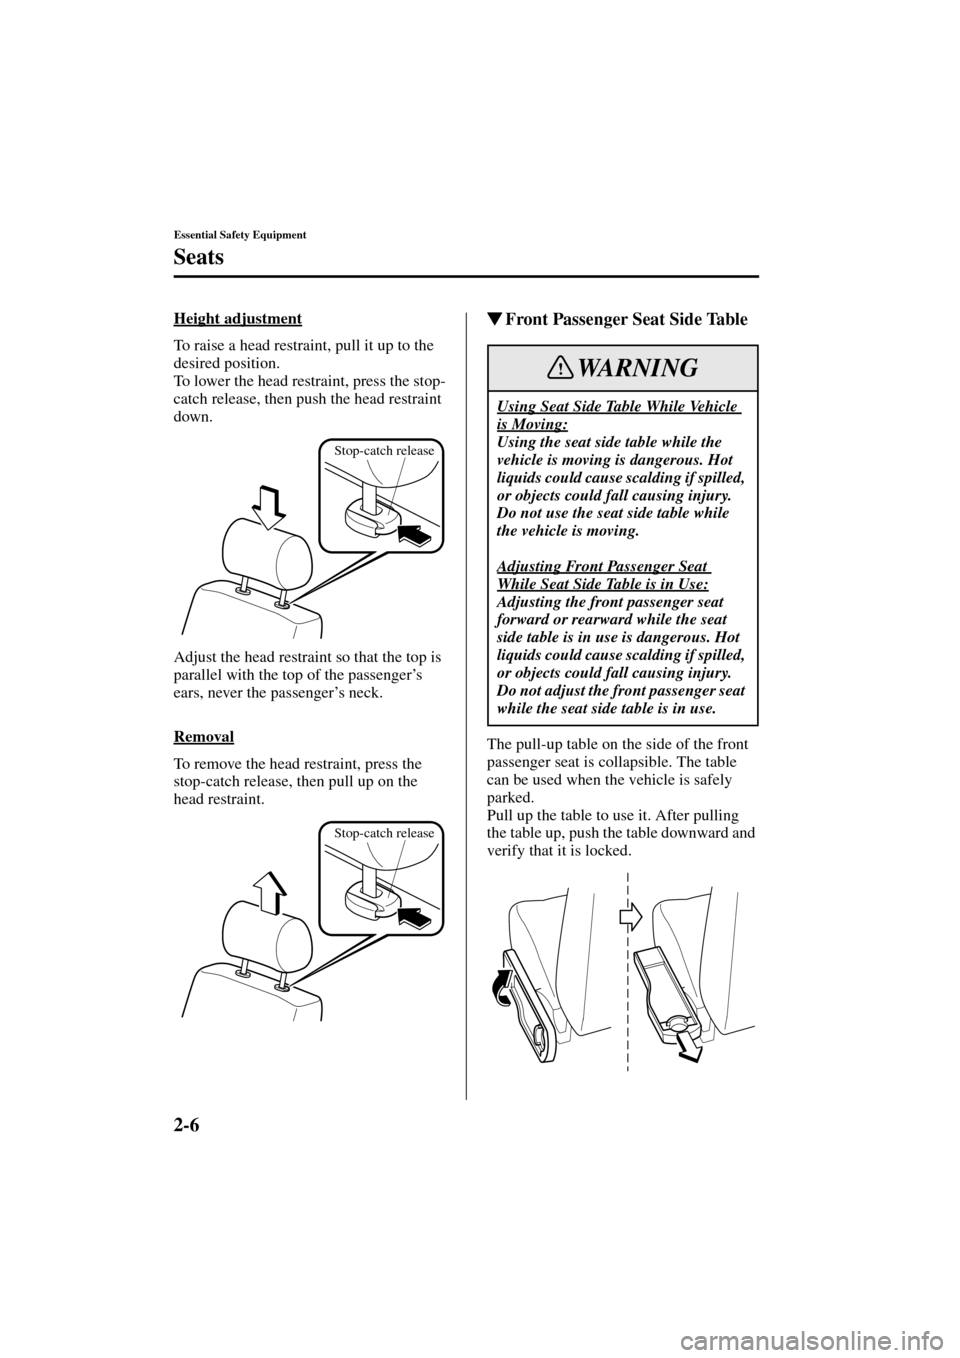 MAZDA MODEL MPV 2004  Owners Manual (in English) 2-6
Essential Safety Equipment
Seats
Form No. 8S06-EA-03H
Height adjustment
To raise a head restraint, pull it up to the 
desired position.
To lower the head restraint, press the stop-
catch release, 